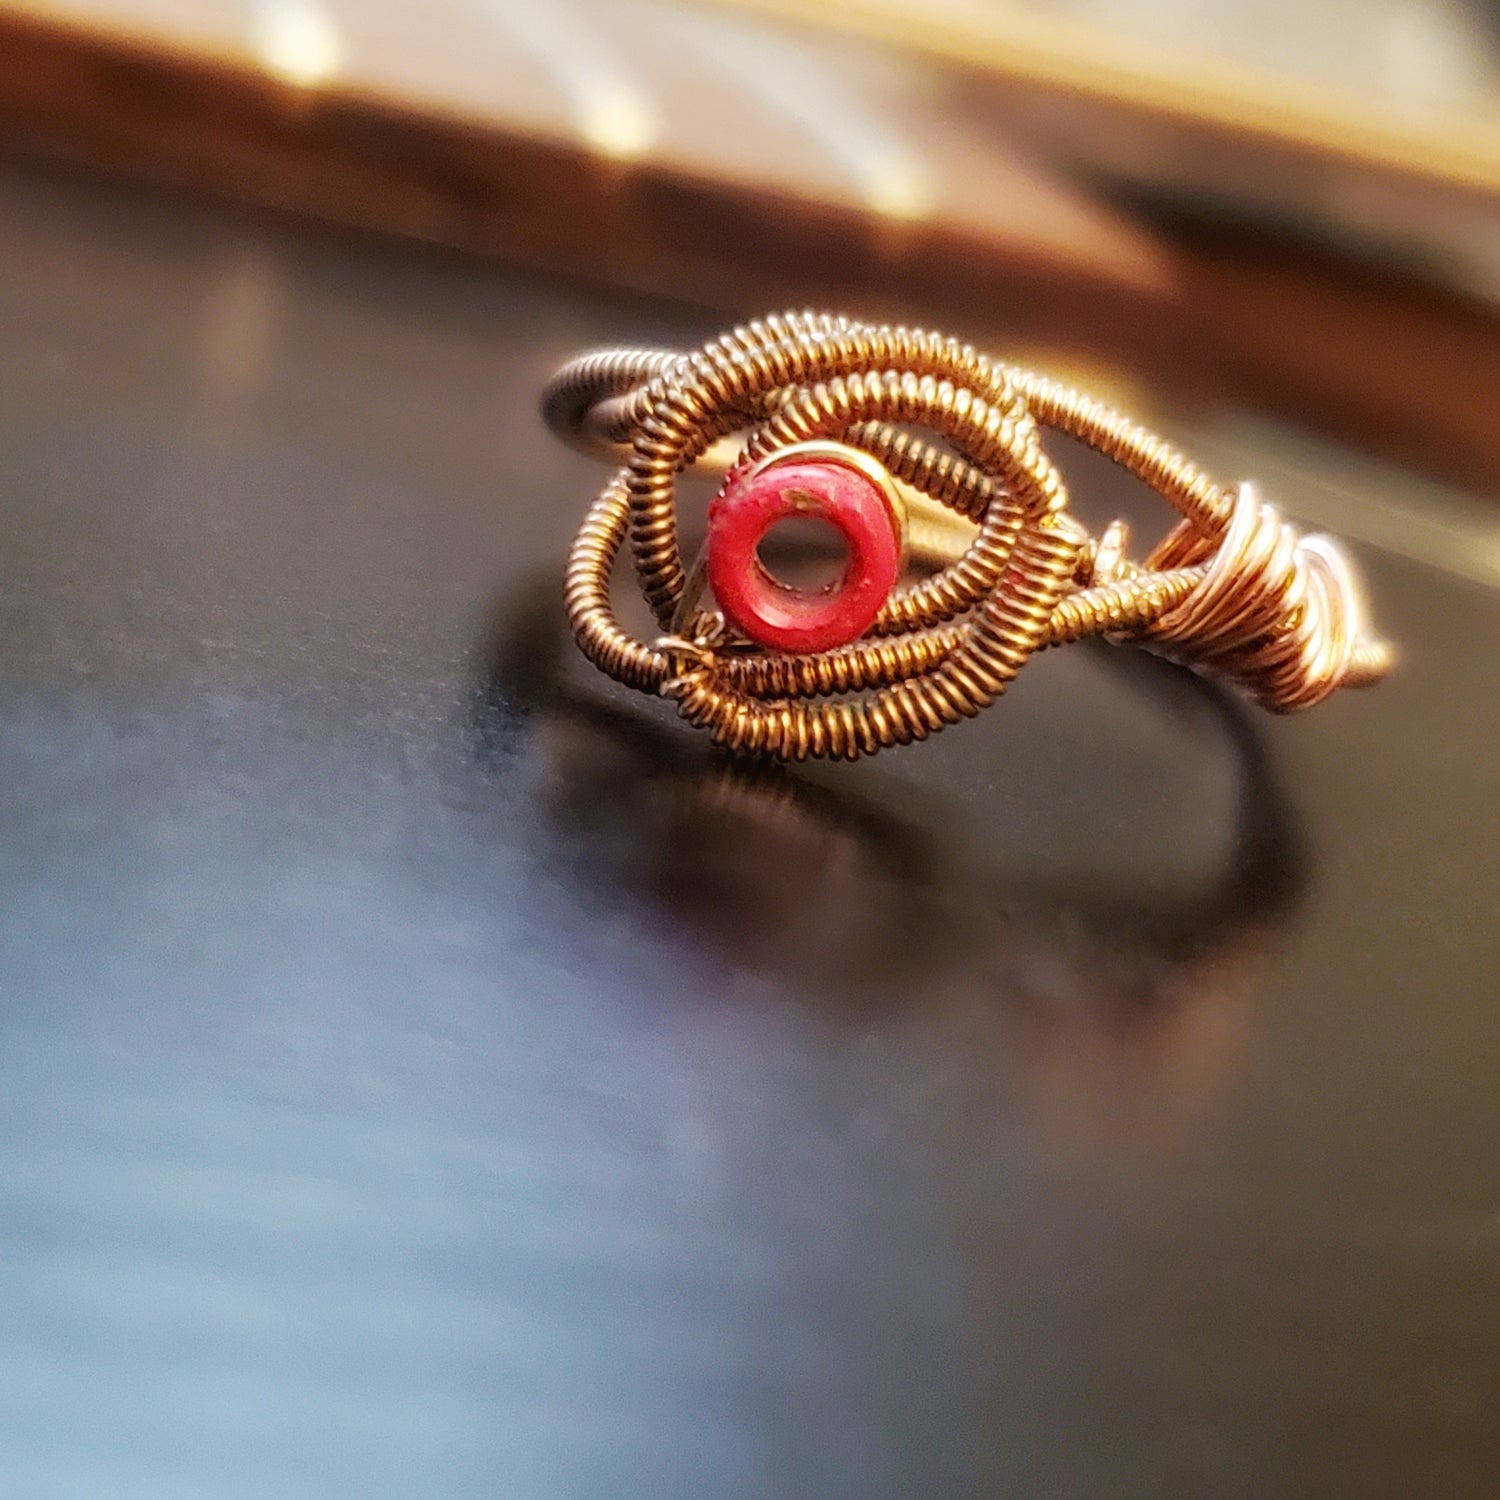 top view of a ing in the shape of a rose, made from an upcycled guitar string - ring is lying on top of the body of a black guitar